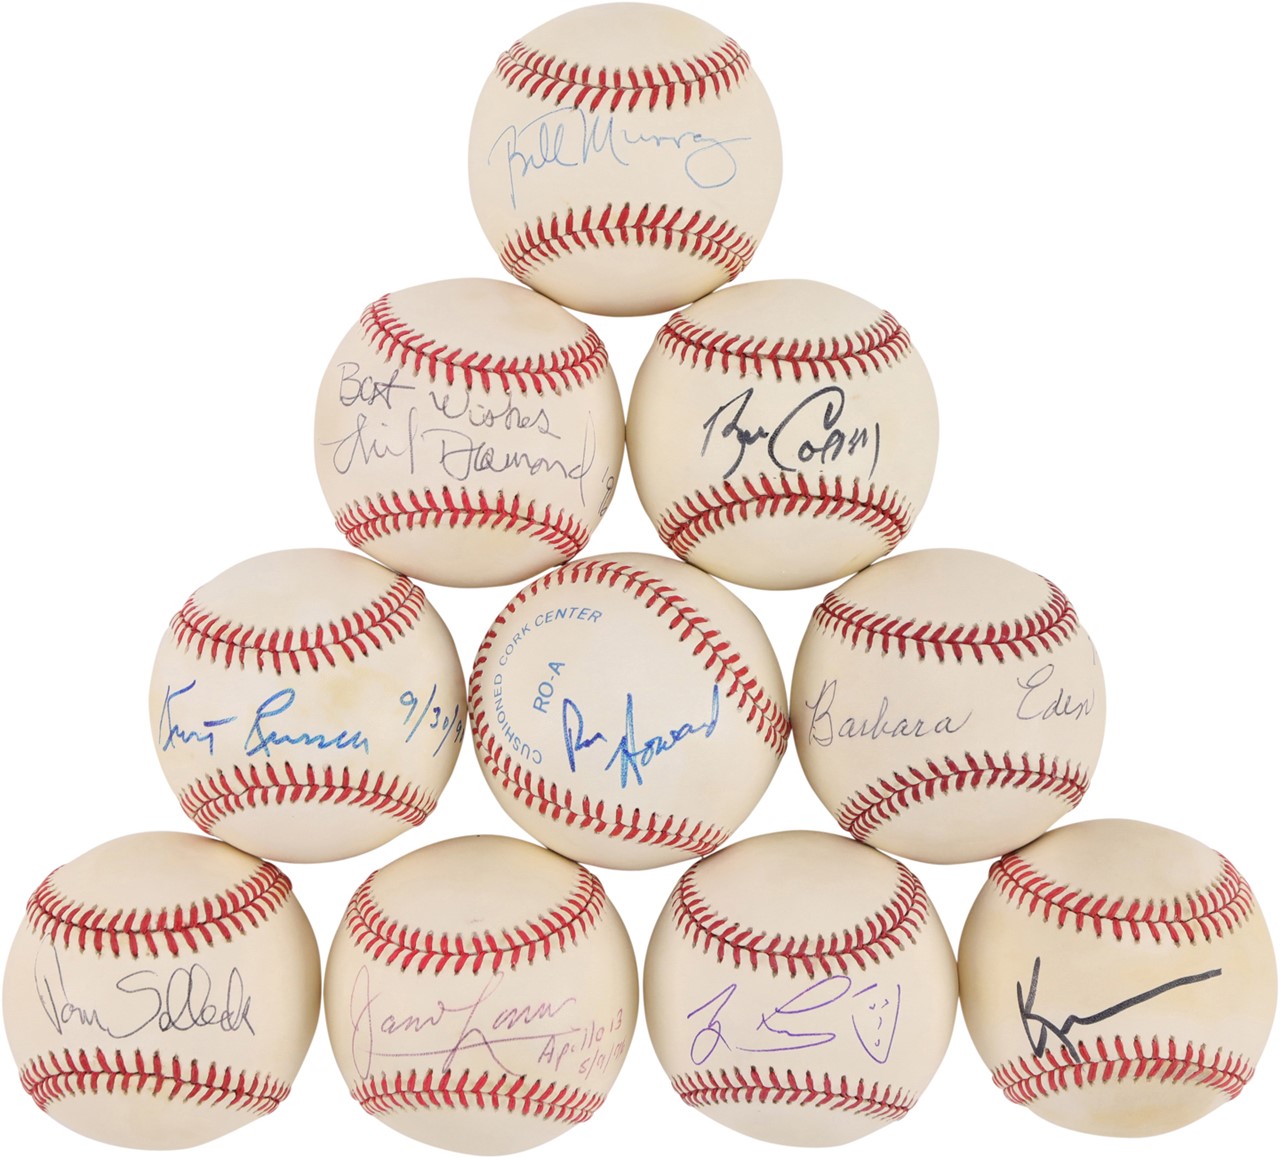 Baseball Autographs - Hollywood & Pop Culture In-Person Signed Baseball Collection from MLB Scout (25)